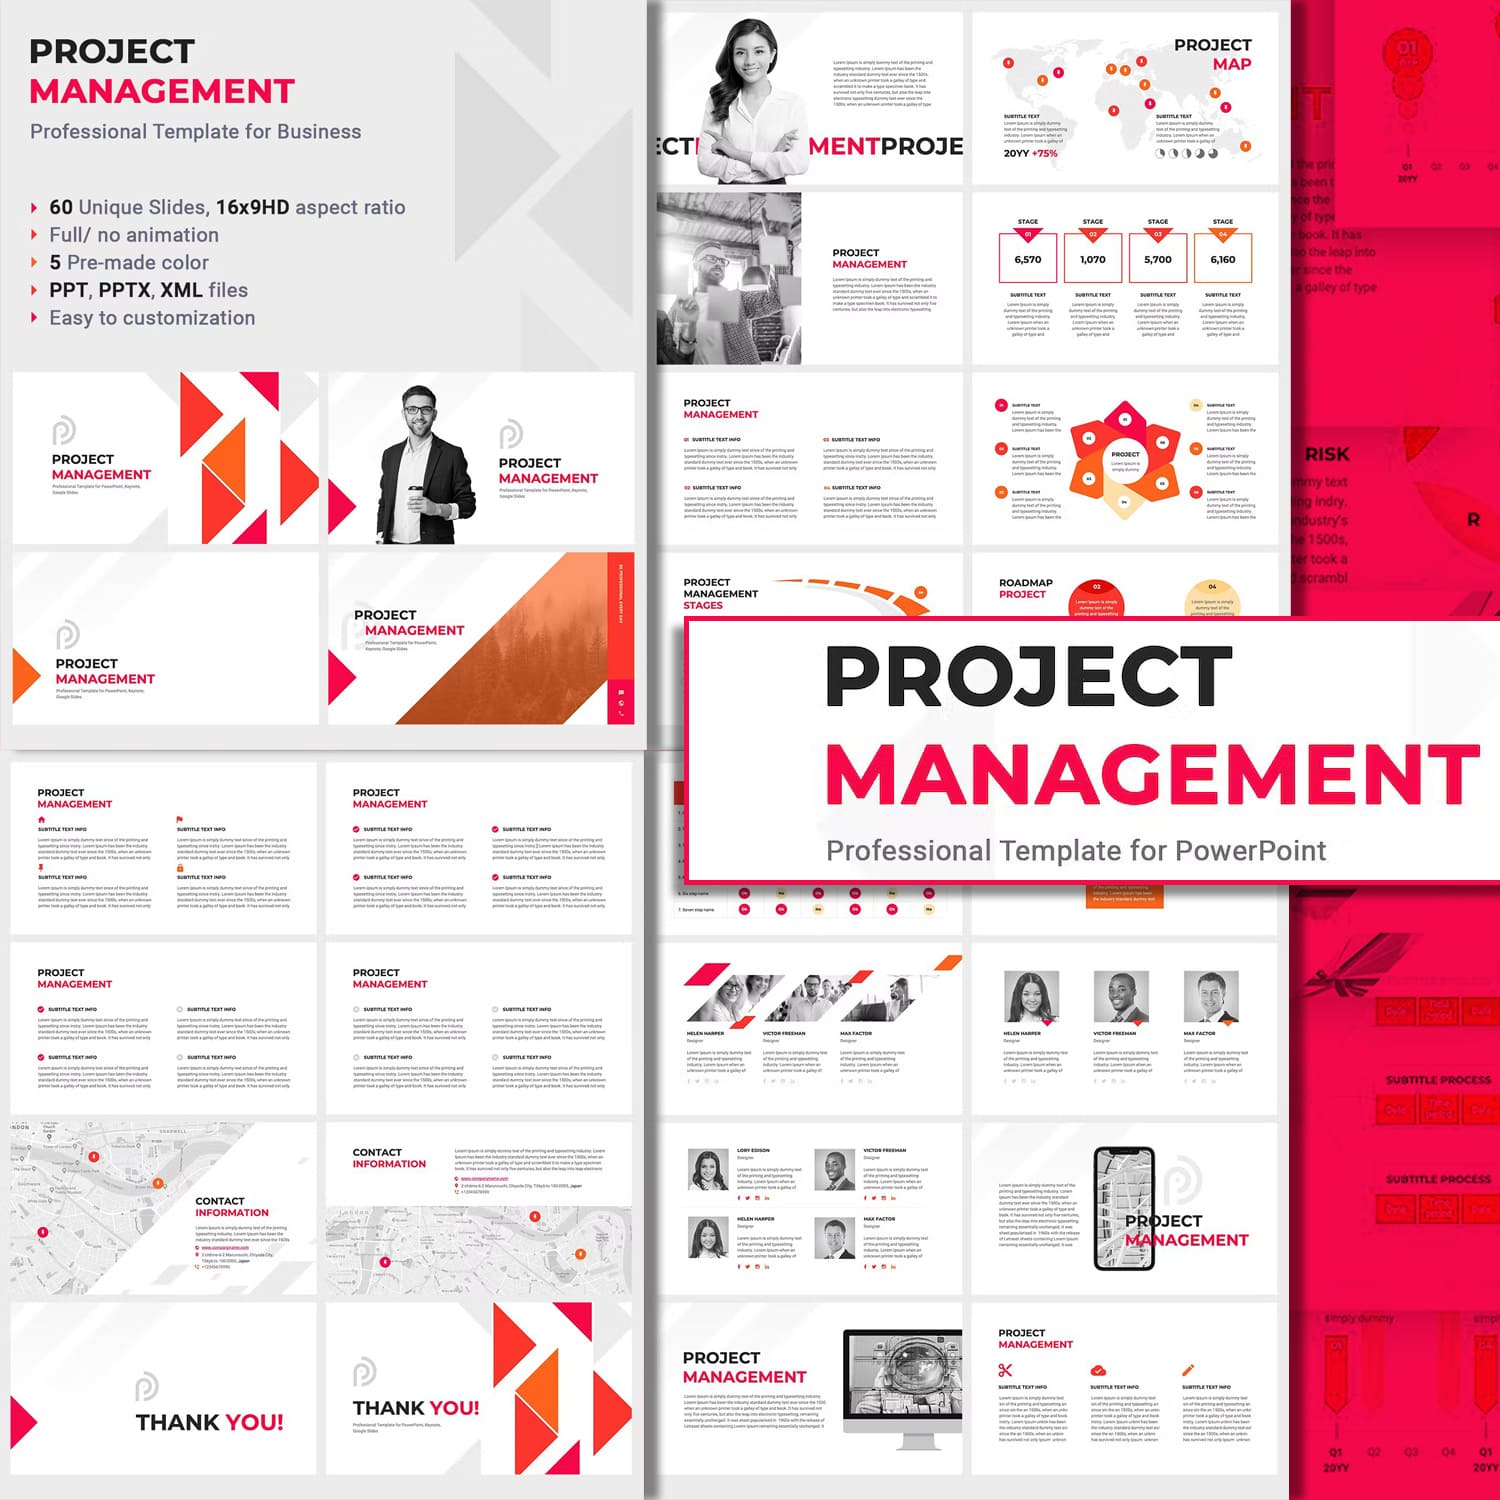 Project management powerpoint from Site2max.